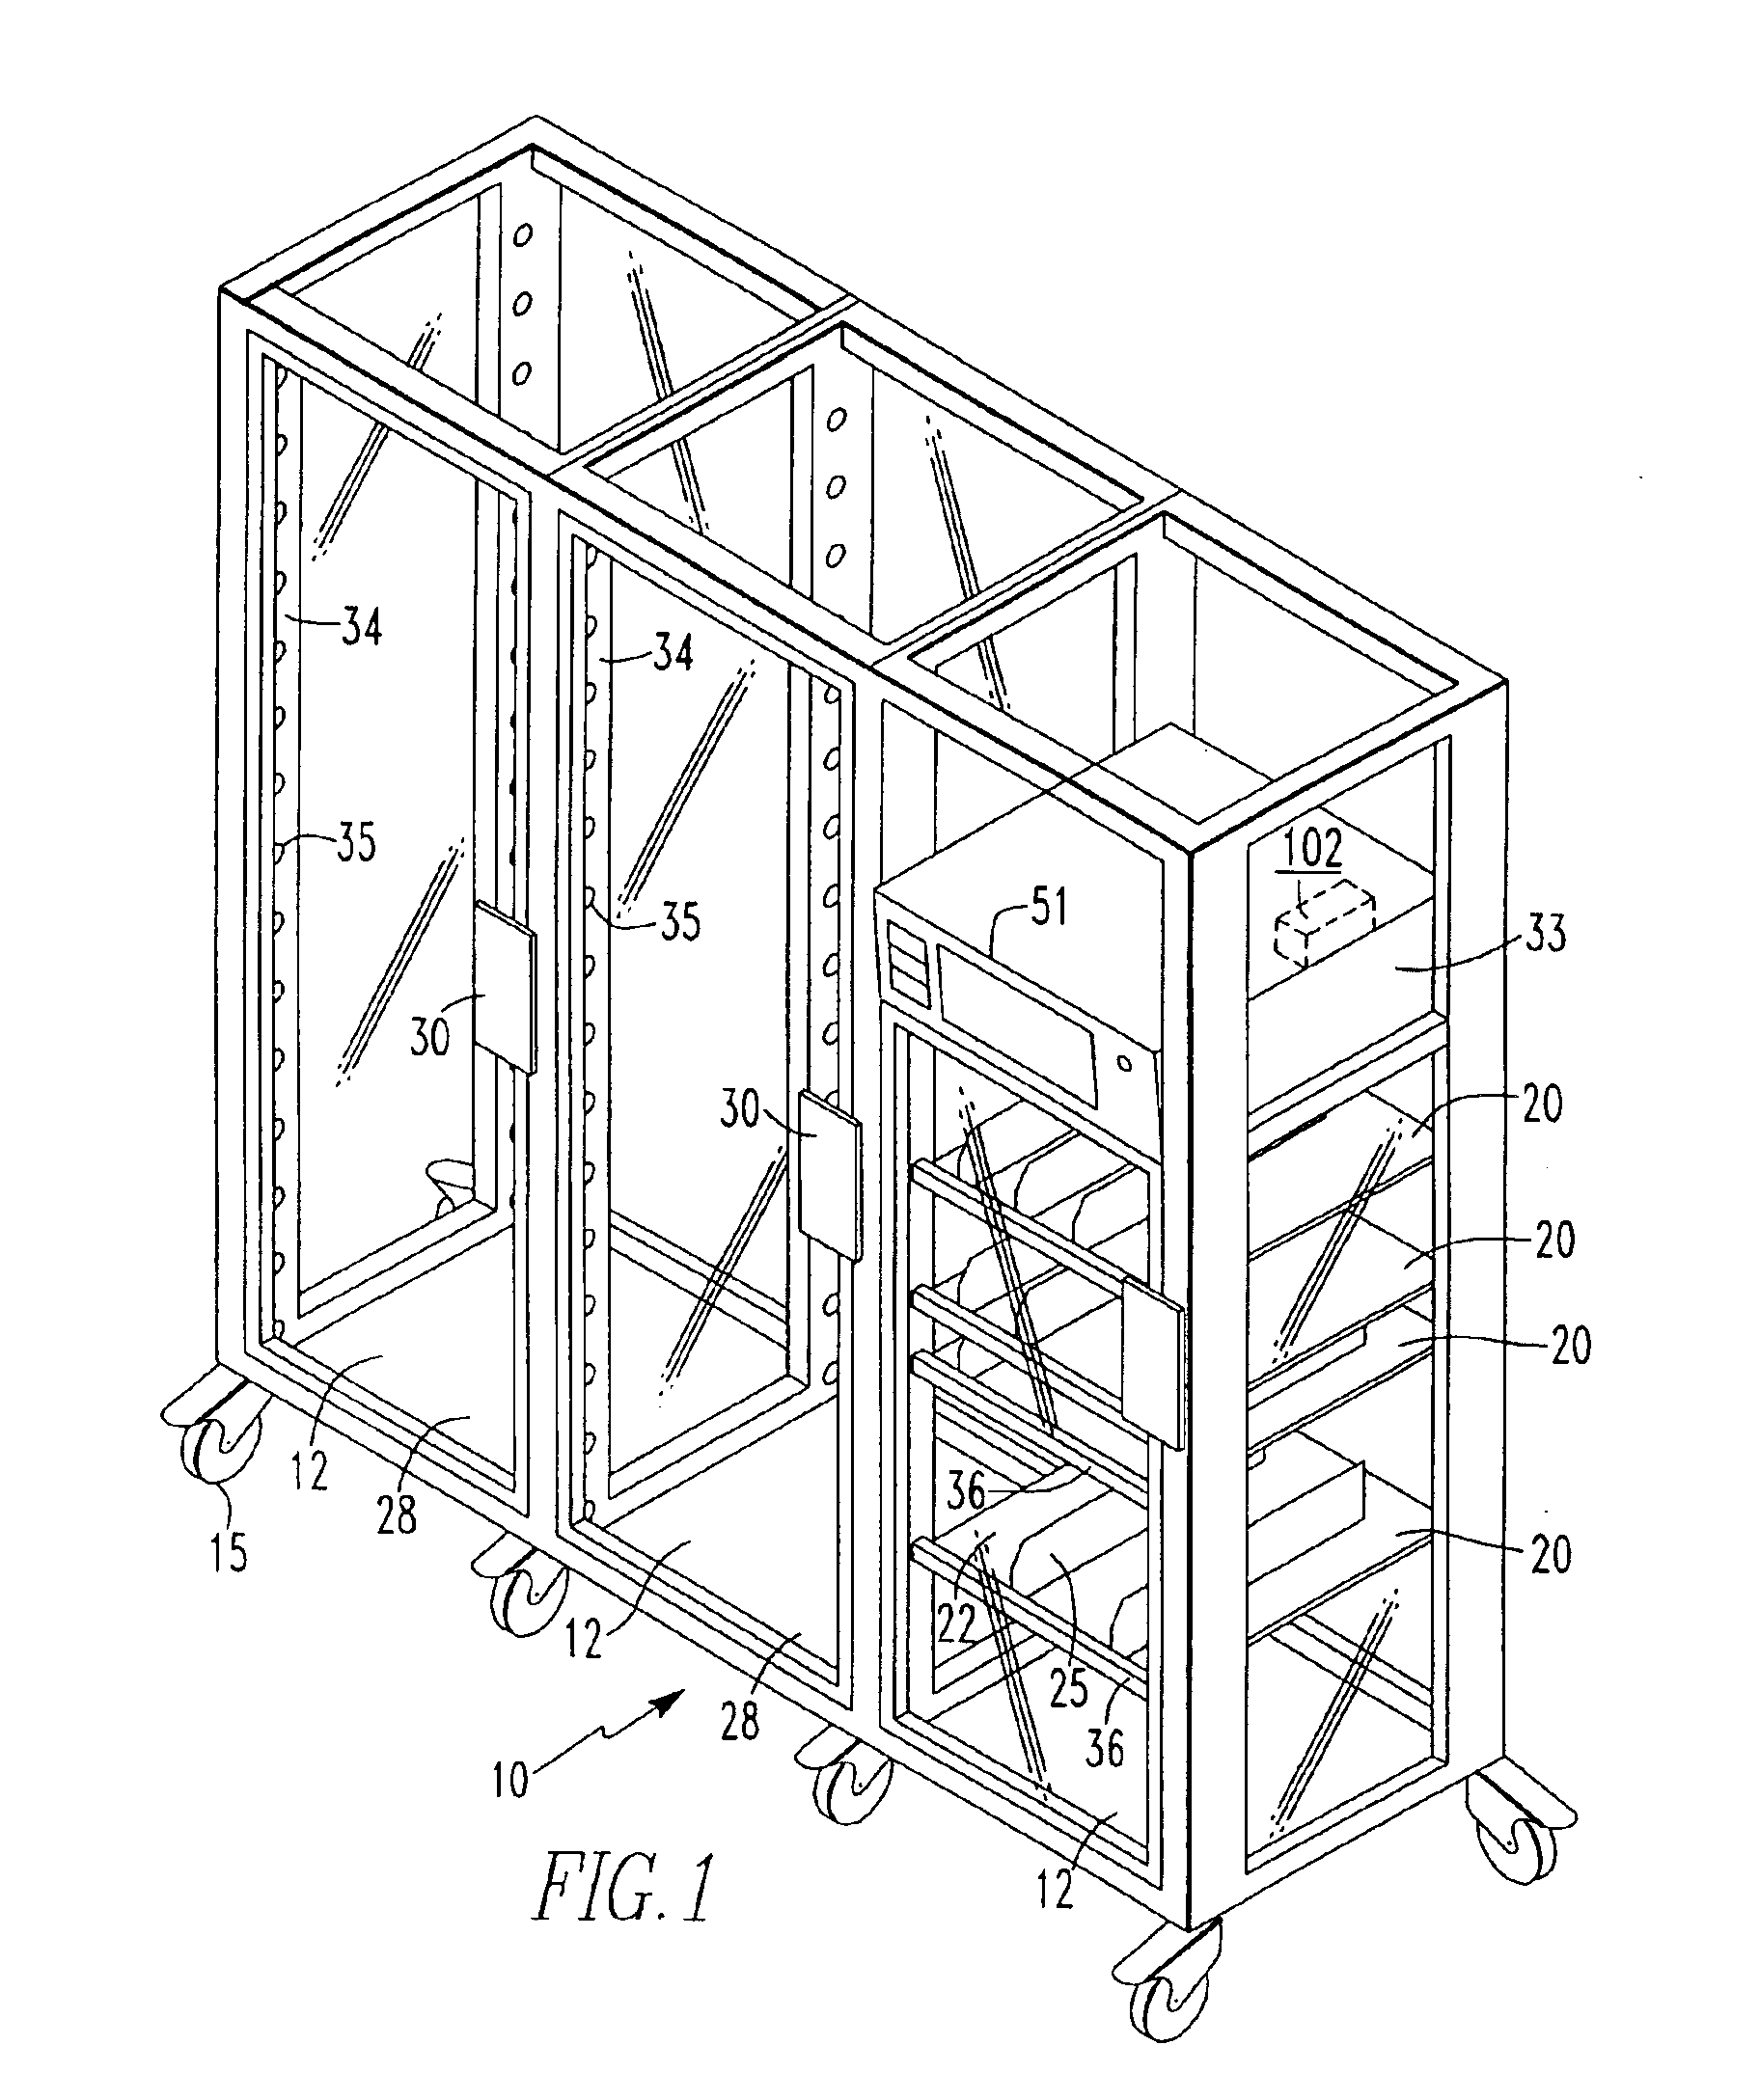 Method of operating a dispensing cabinet